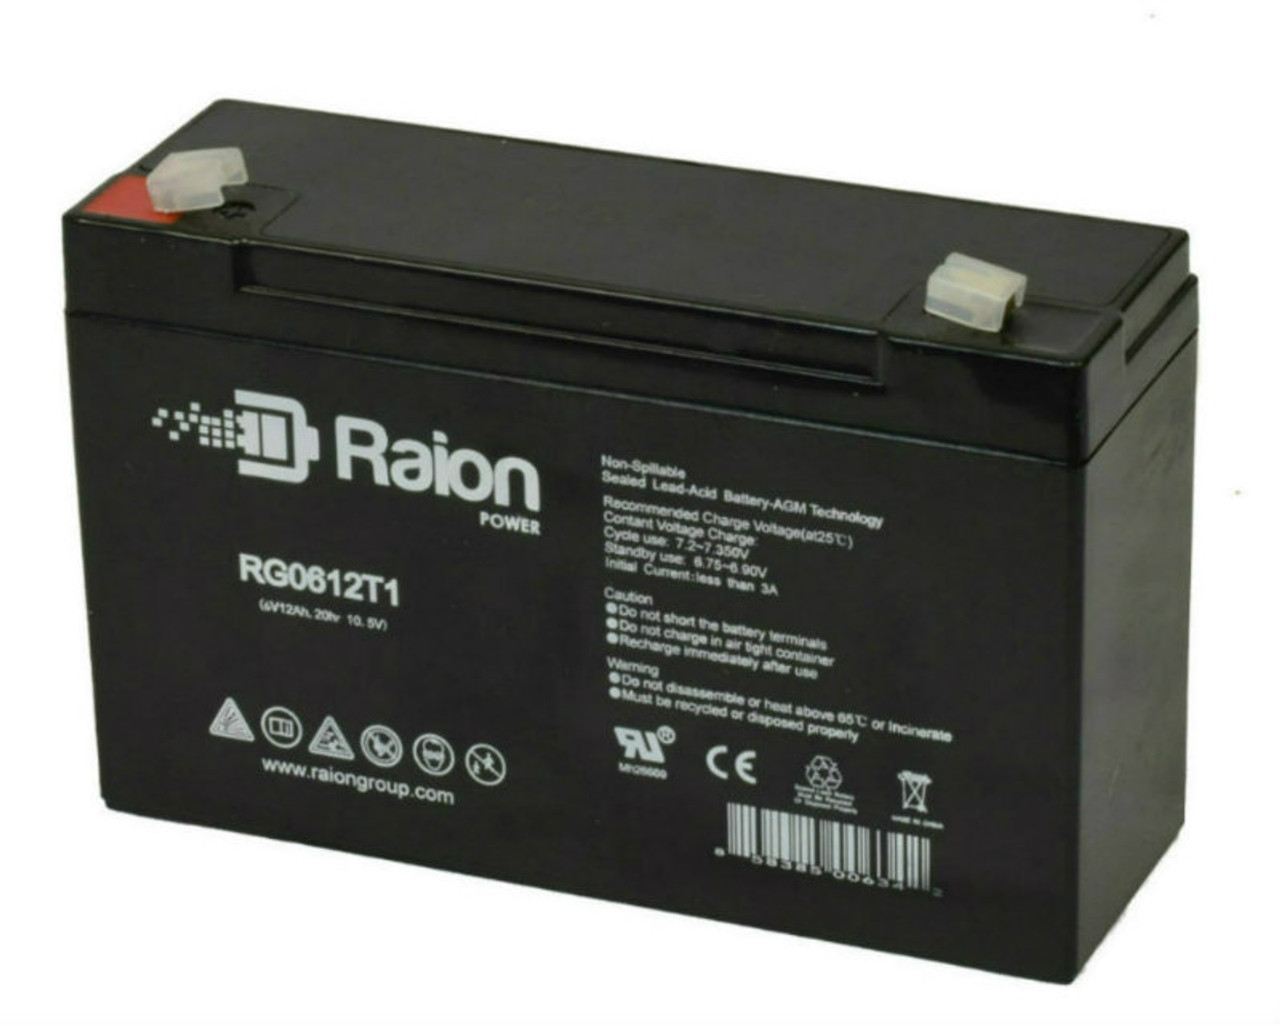 Raion Power RG06120T1 Replacement 6V 12Ah Emergency Light Battery for Sonnenschein PS12120L